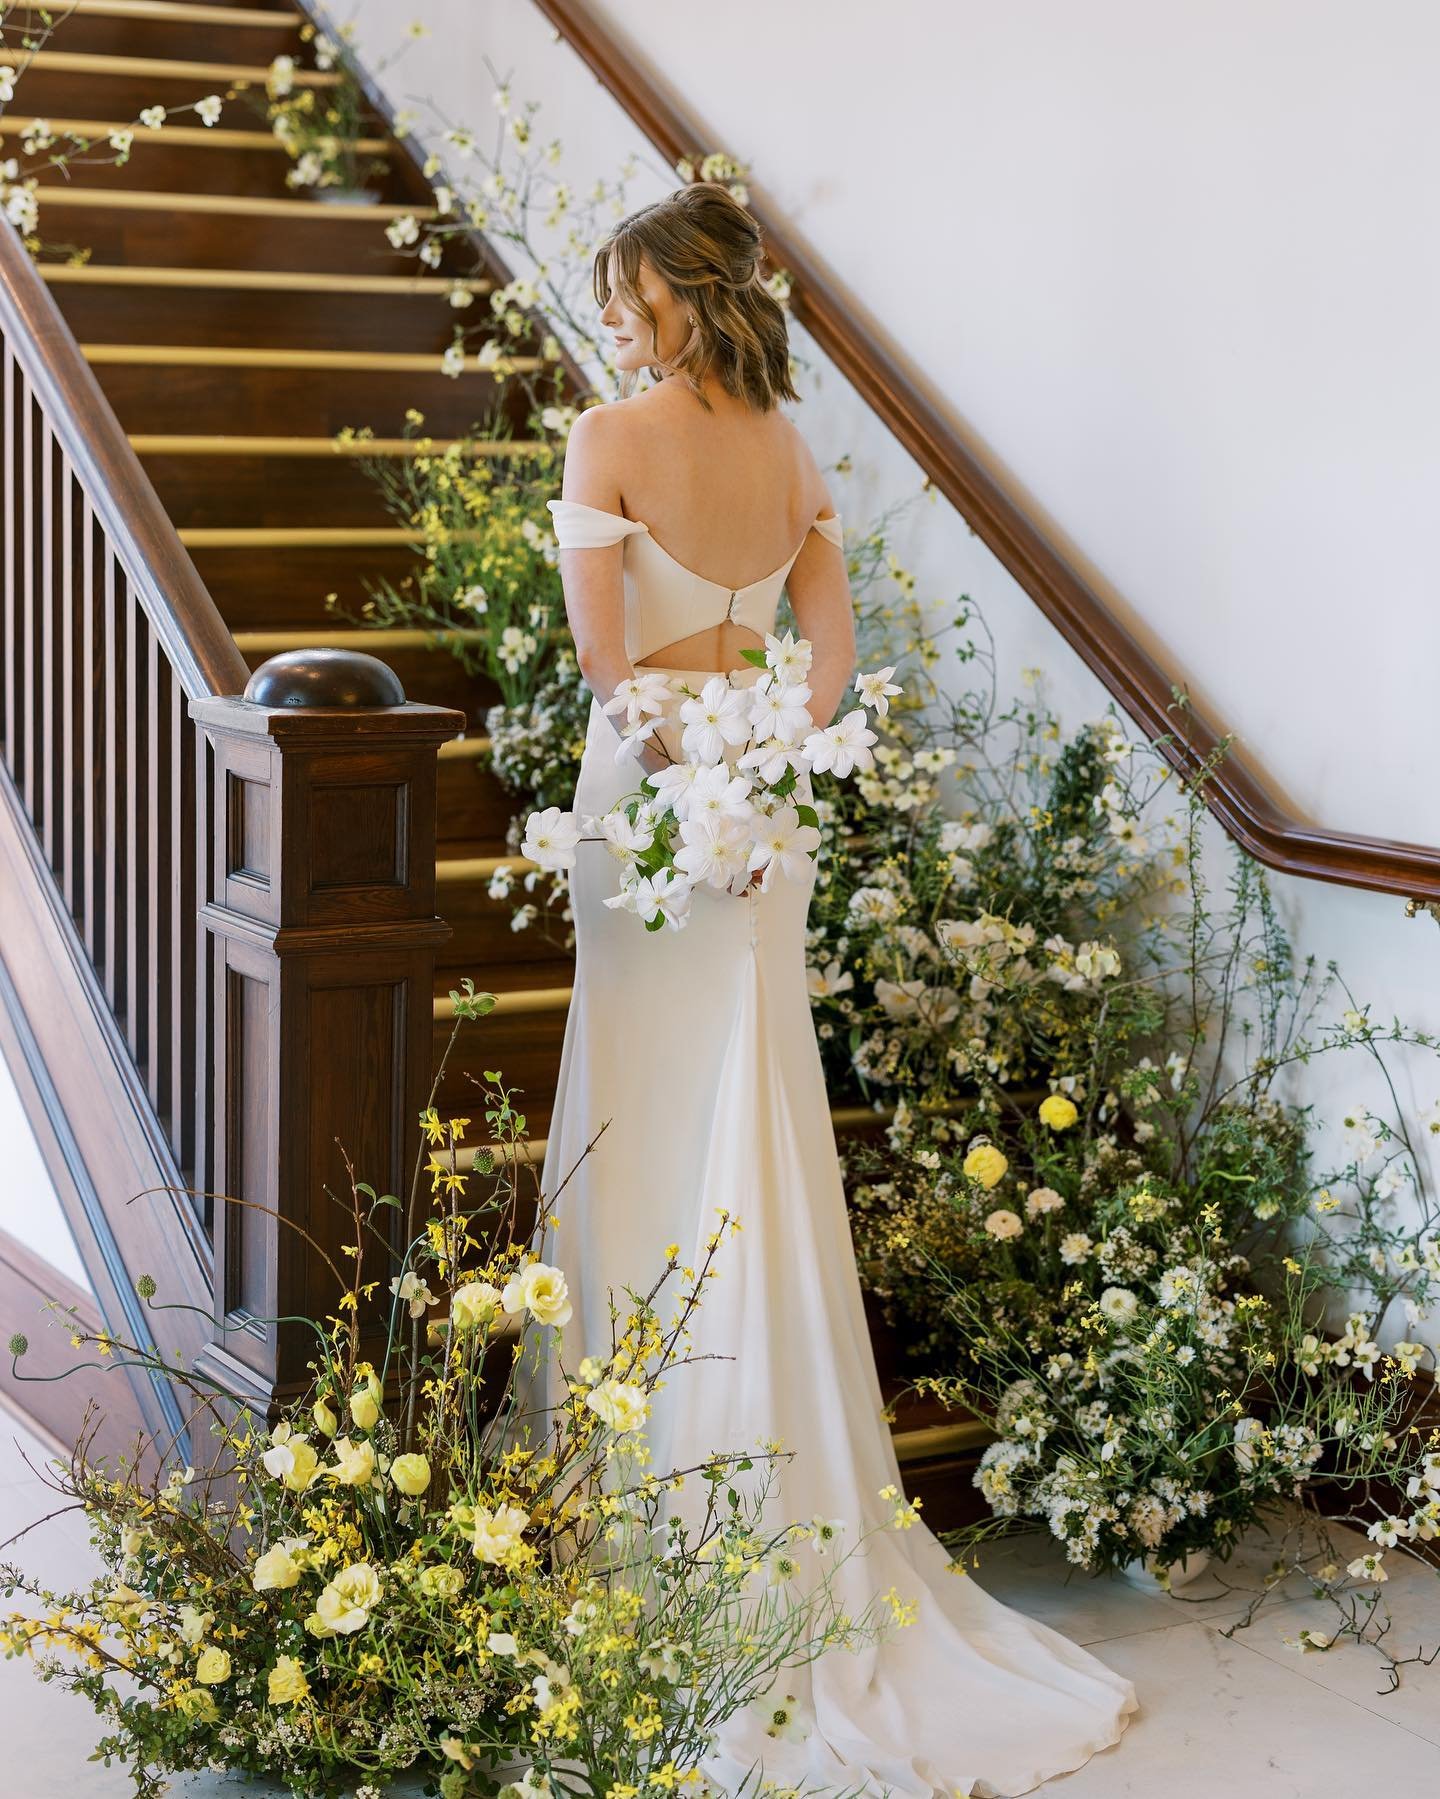 Spring in full bloom 🌼

Once again, 10 photos is never enough but especially when it comes to this spring lovers dream!! 
Here&rsquo;s just a little peek at a beautiful day with a few of my very talented friends. 

Venue: @1908grand 
Florals + Desig